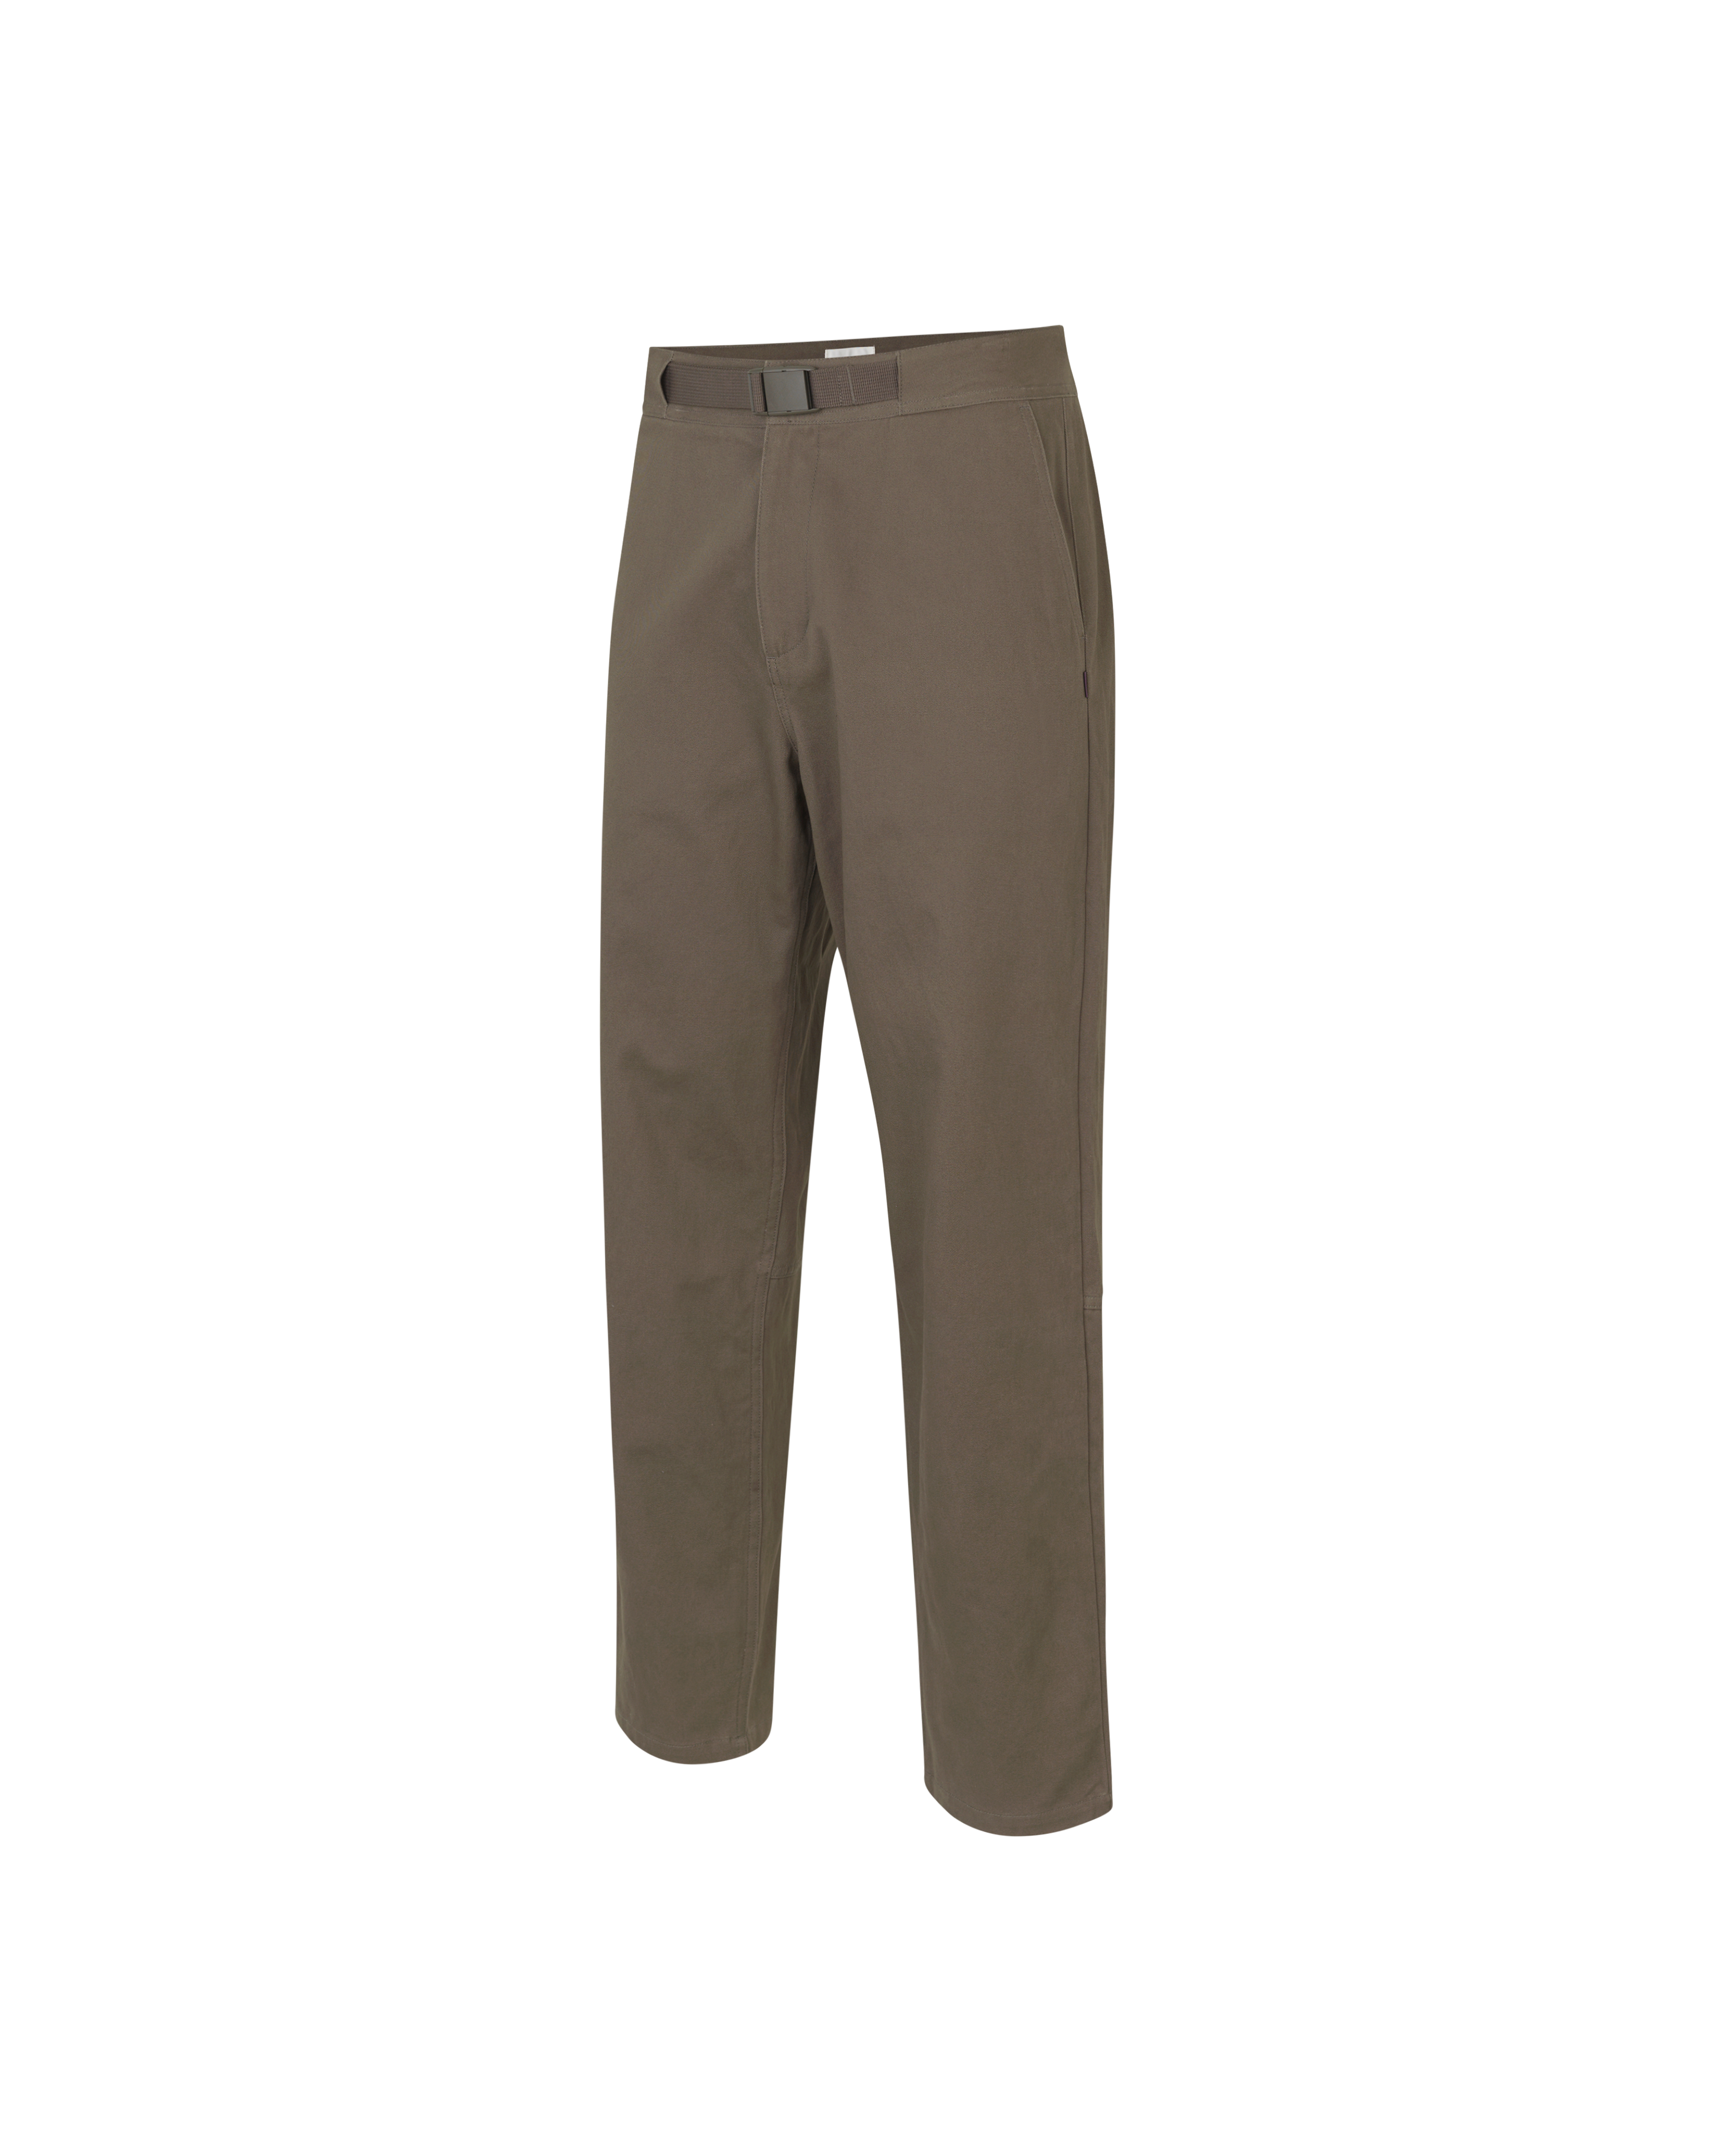 Off-Race Cotton Twill Pants - Ash Brown